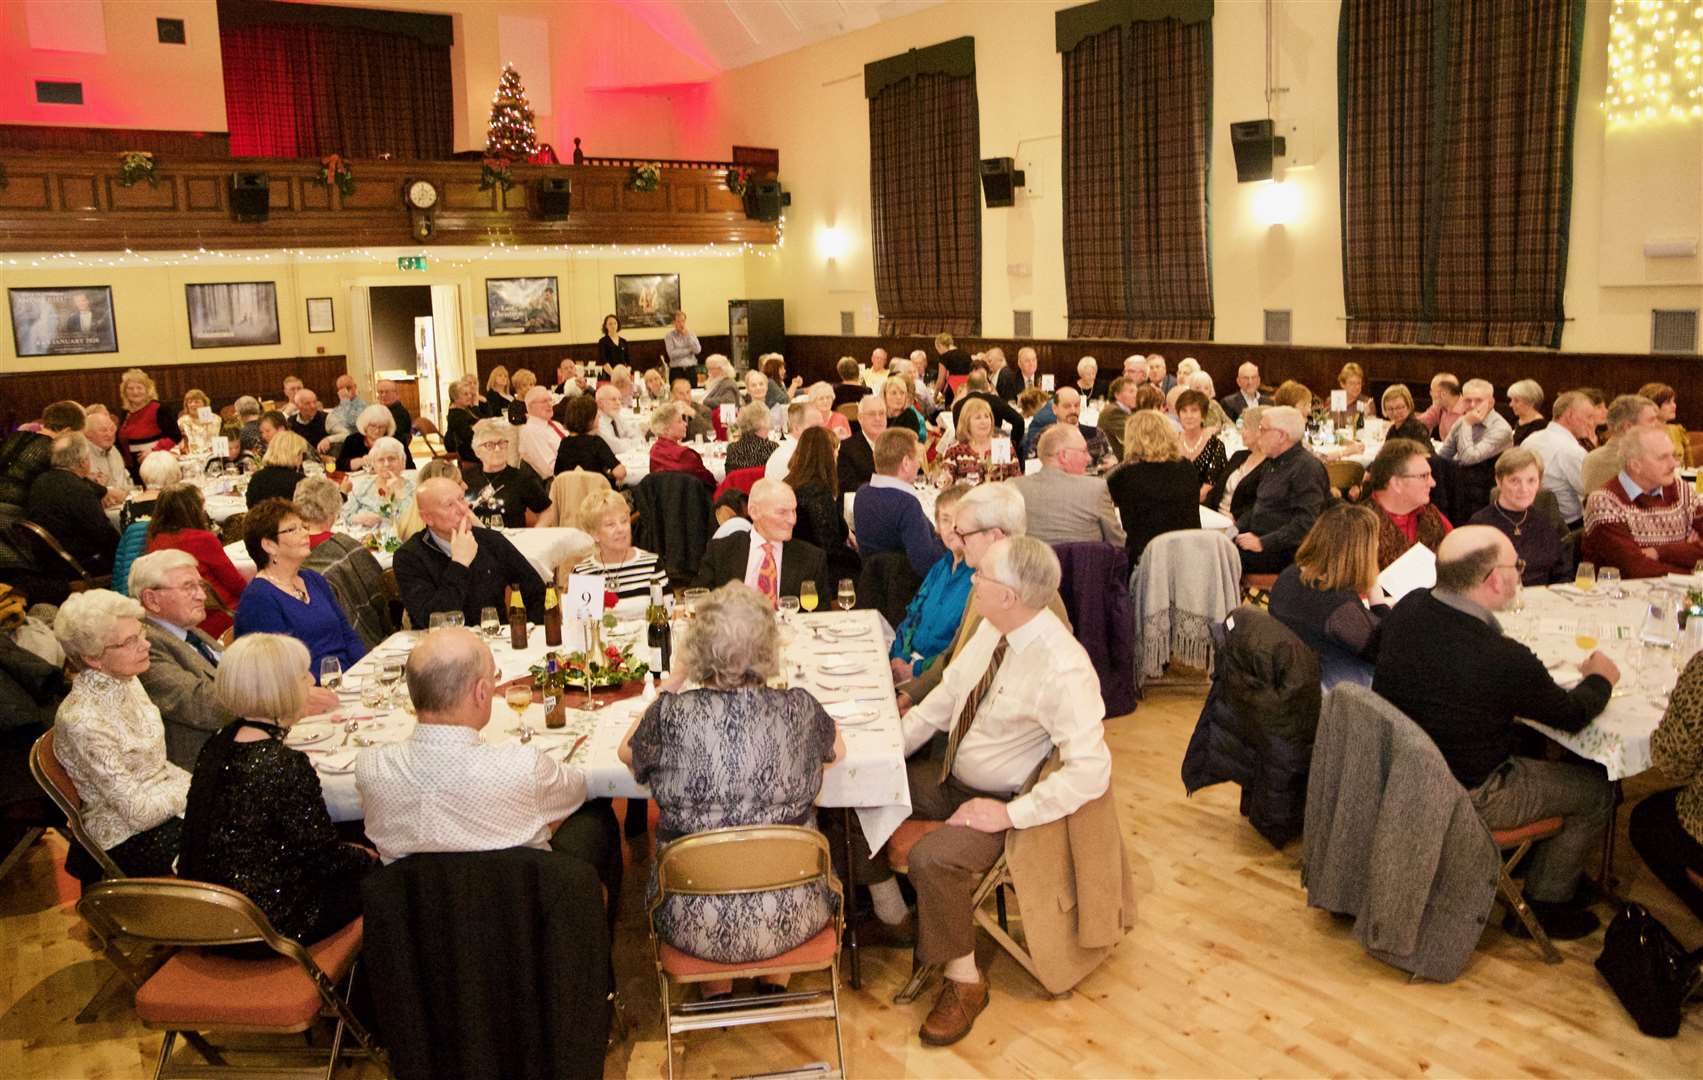 The Indian buffet fundraiser at the Victoria Hall was a roaring success for the Ellon Rotary Club. Picture: Phil Harman